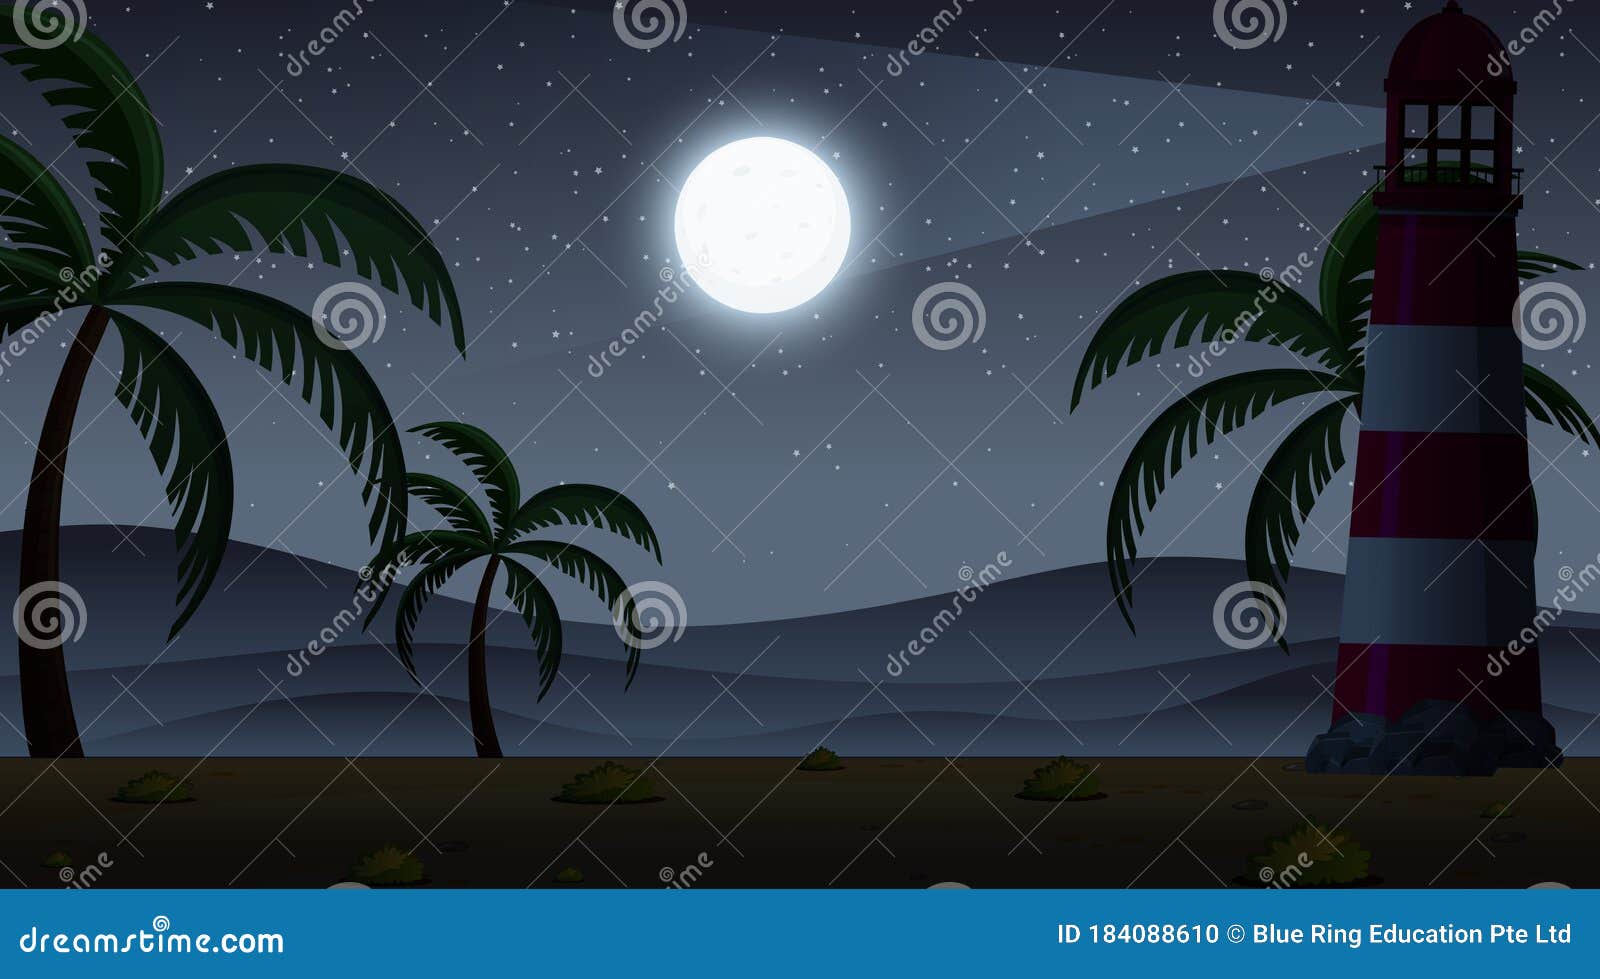 Background Scene with Dark Sky and Lighthouse Stock Vector ...